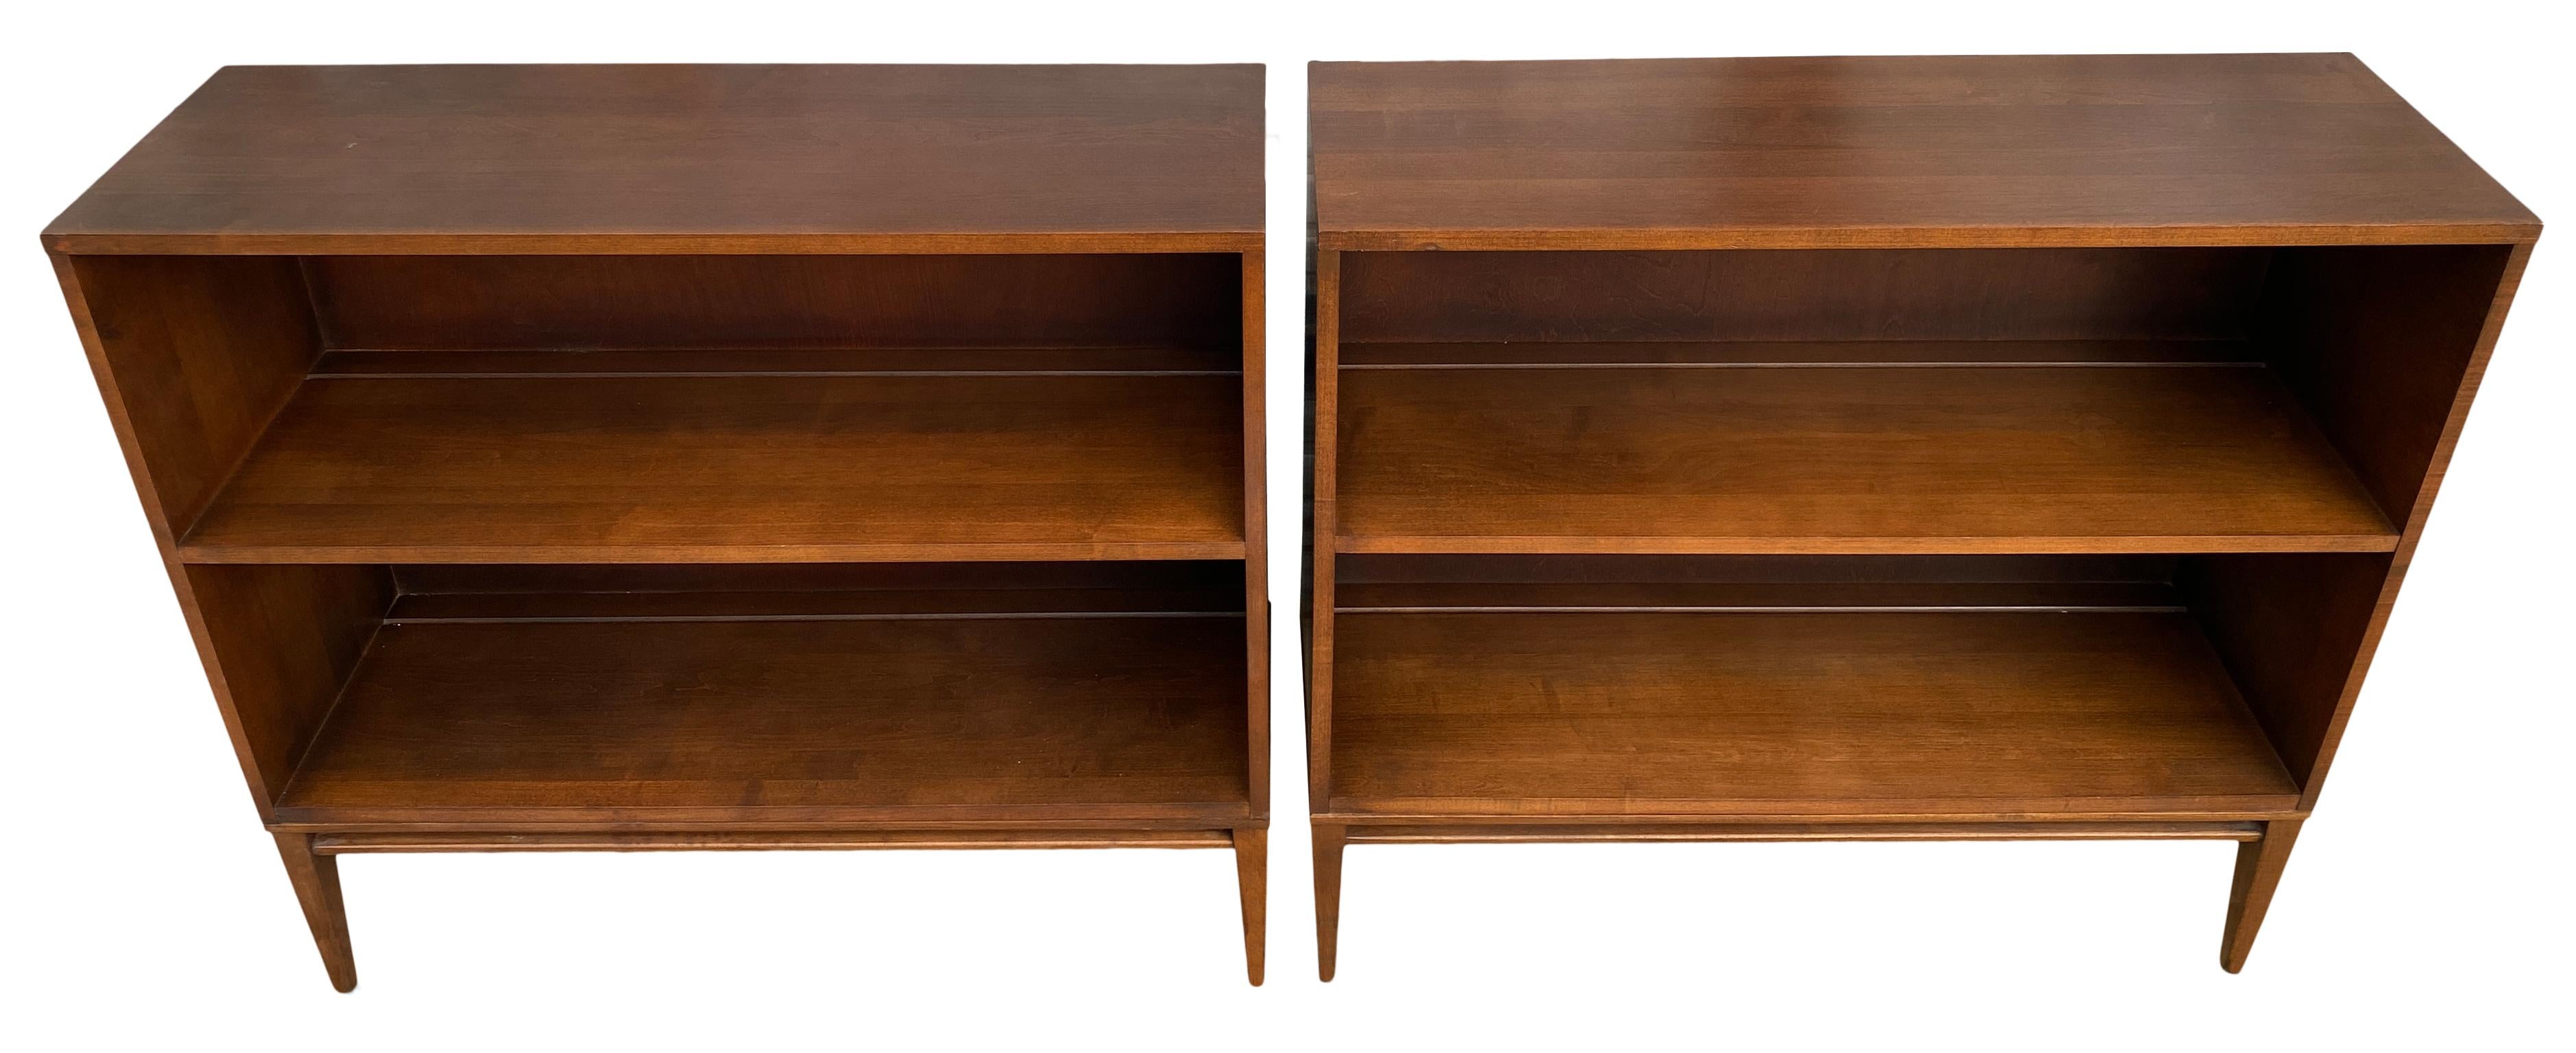 Pair of vintage midcentury Paul McCobb single high bookcases bookshelves #1516 original walnut finish over solid maple with solid maple 4 leg base. Beautiful bookcase set by Paul McCobb, circa 1950s Planner Group, single center fixed shelf, solid